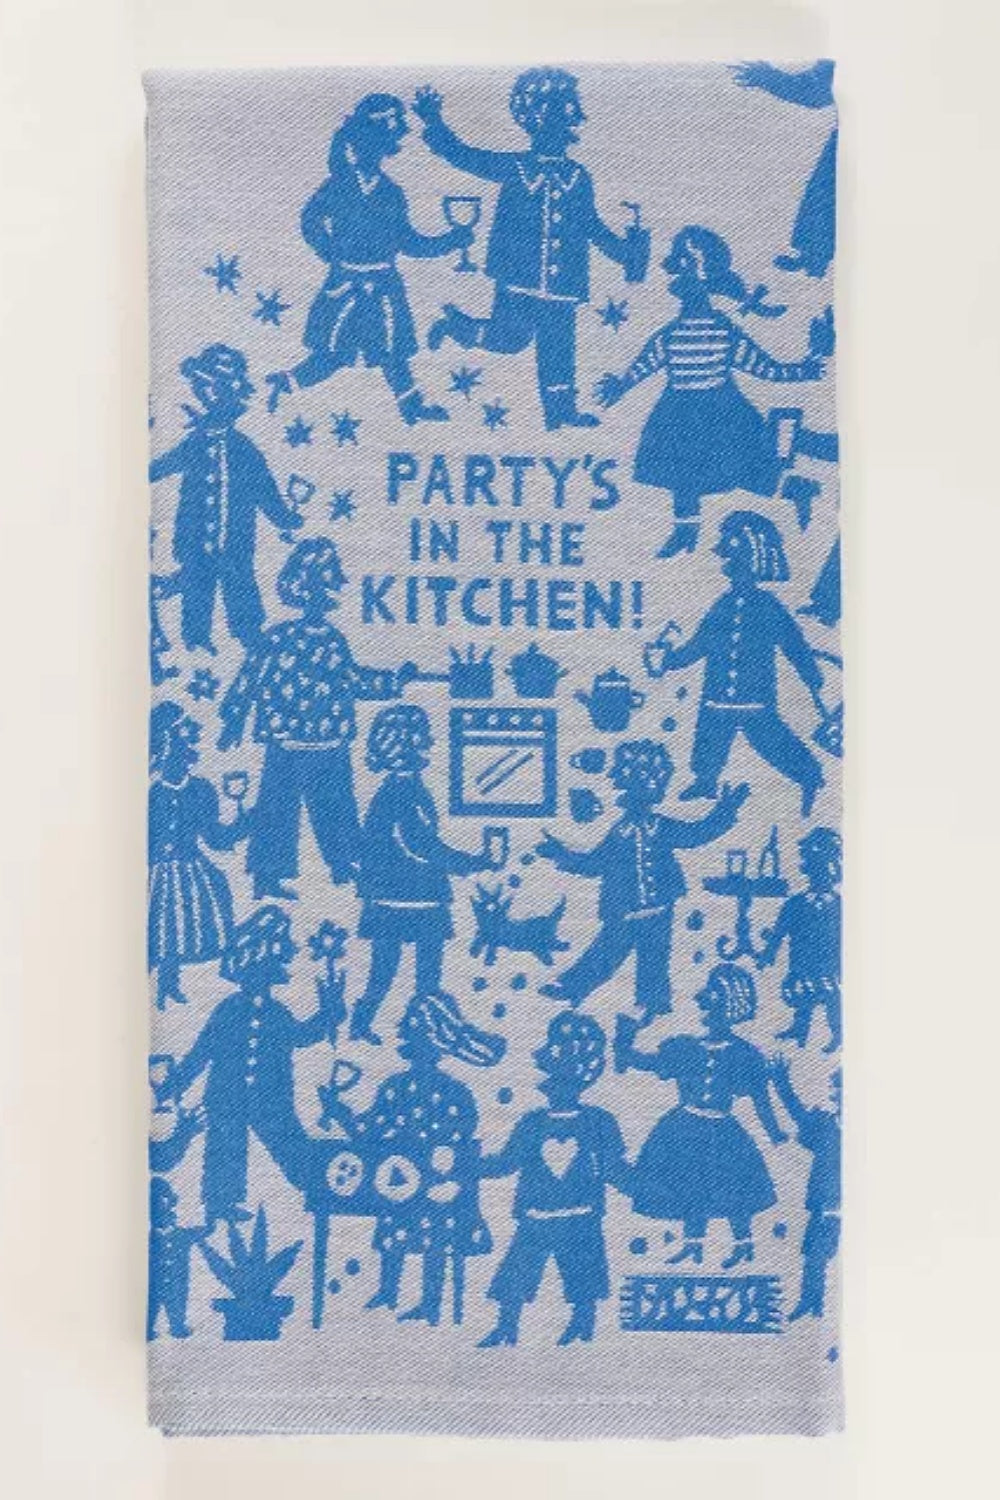 PARTY'S IN THE KITCHEN TEA TOWEL